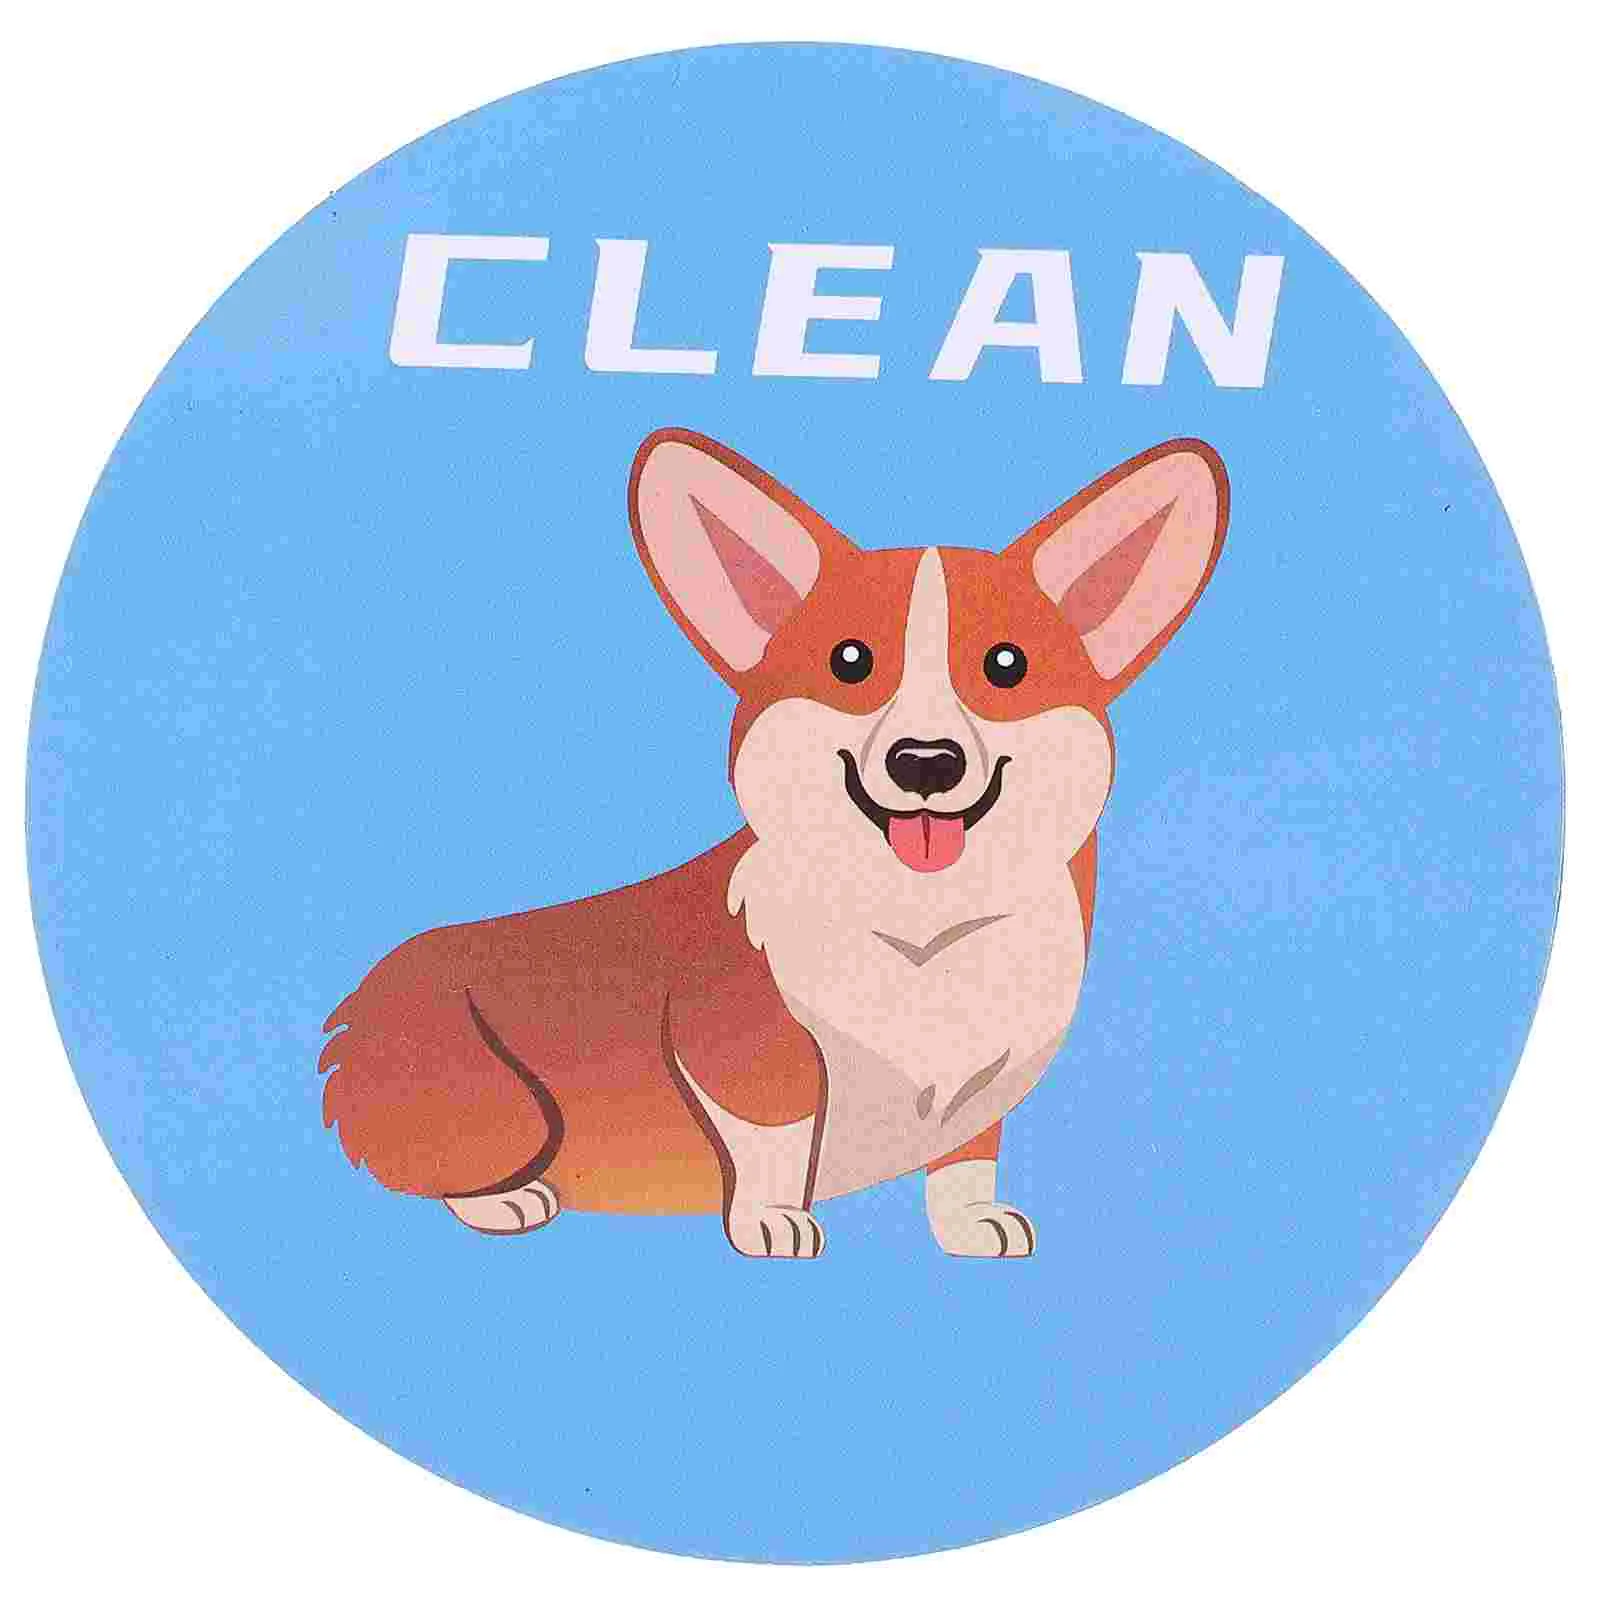 

Dishwasher Cleaning Stickers Dirty Magnet Double Sided The Sign Coated Paper Clean/dirty Funny Magnets Apartment Necessities